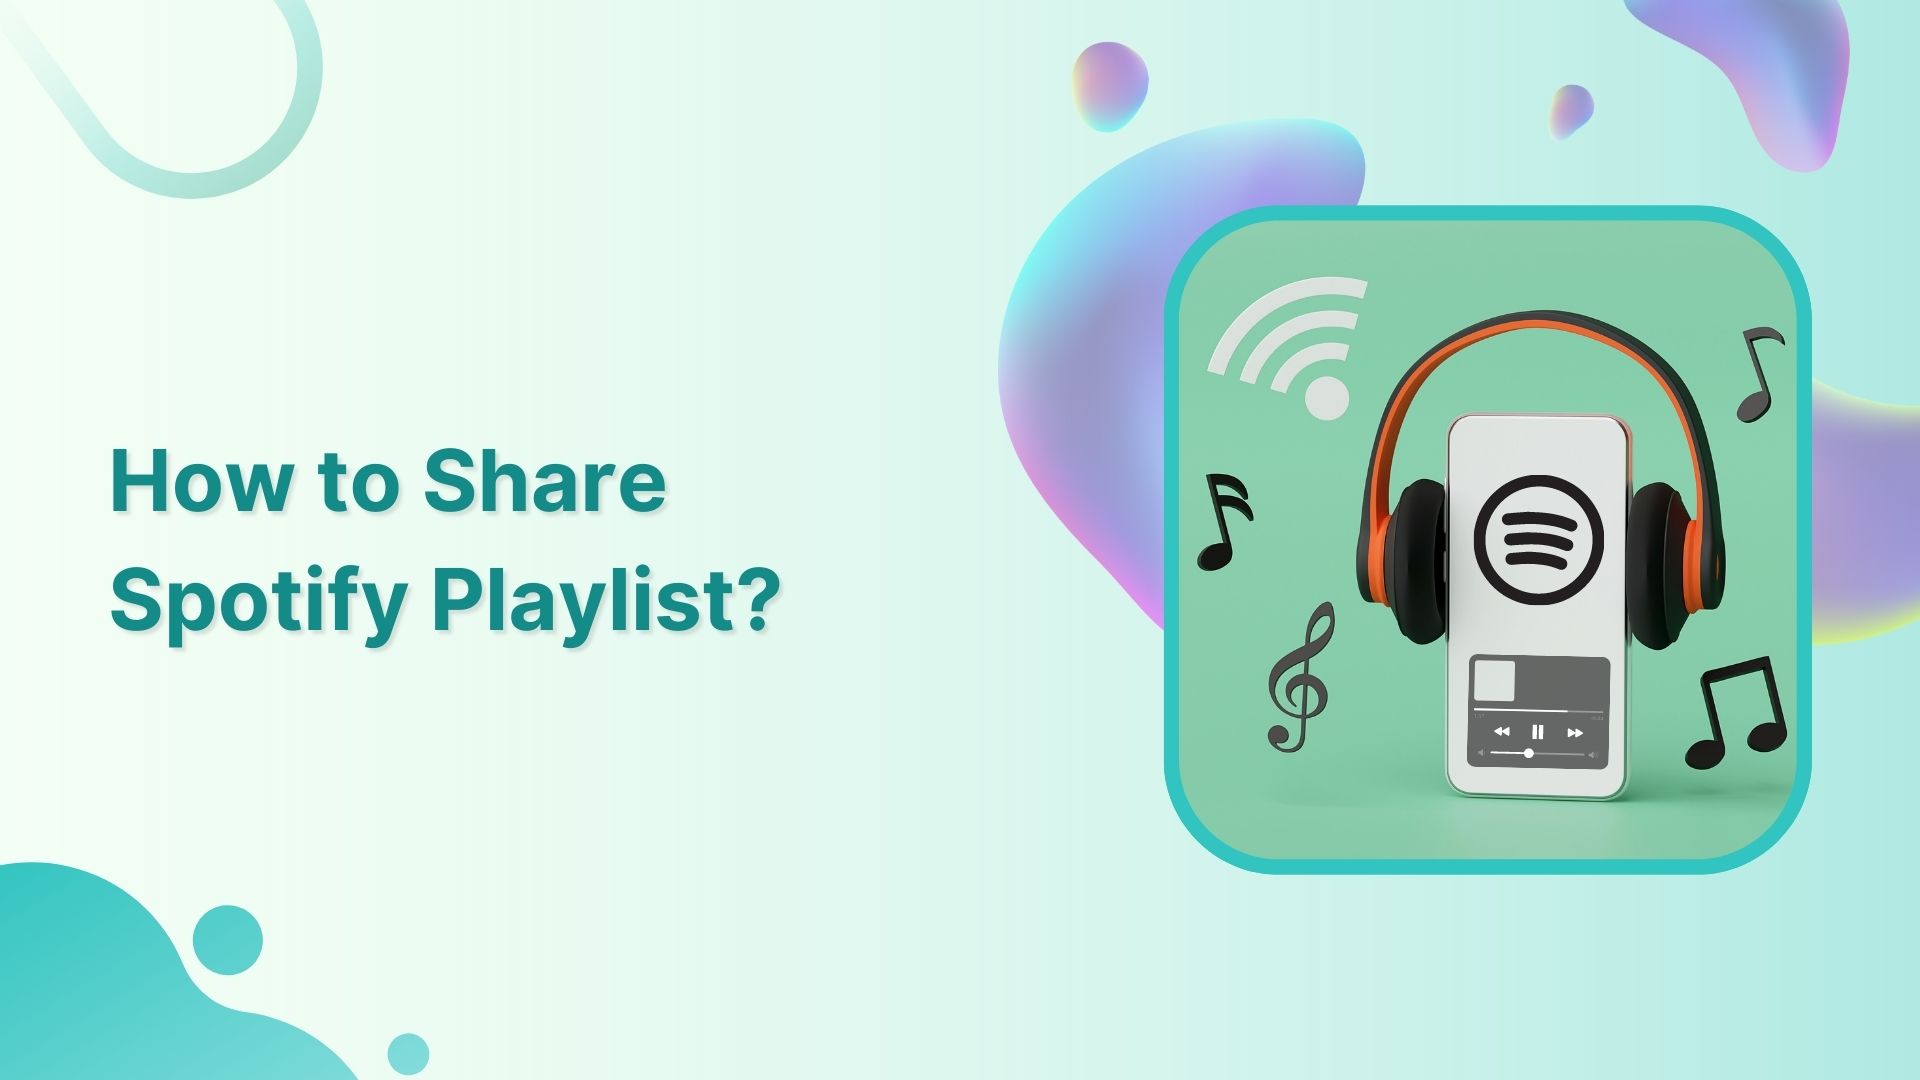 How to Share Spotify Playlist: Step-by-Step Guide